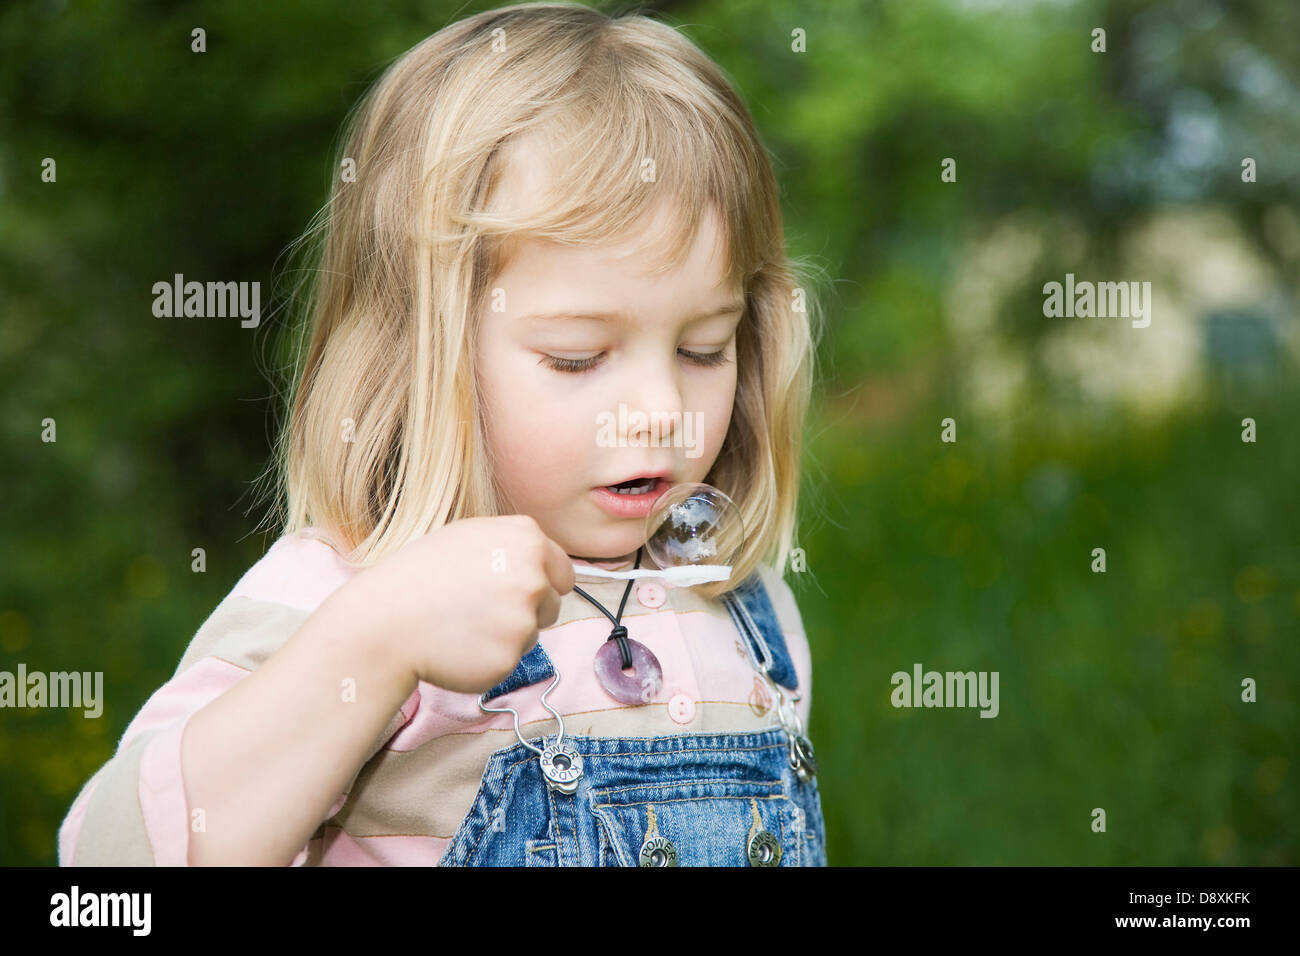 Four year-old girl balancing a soap bubble Stock Photo